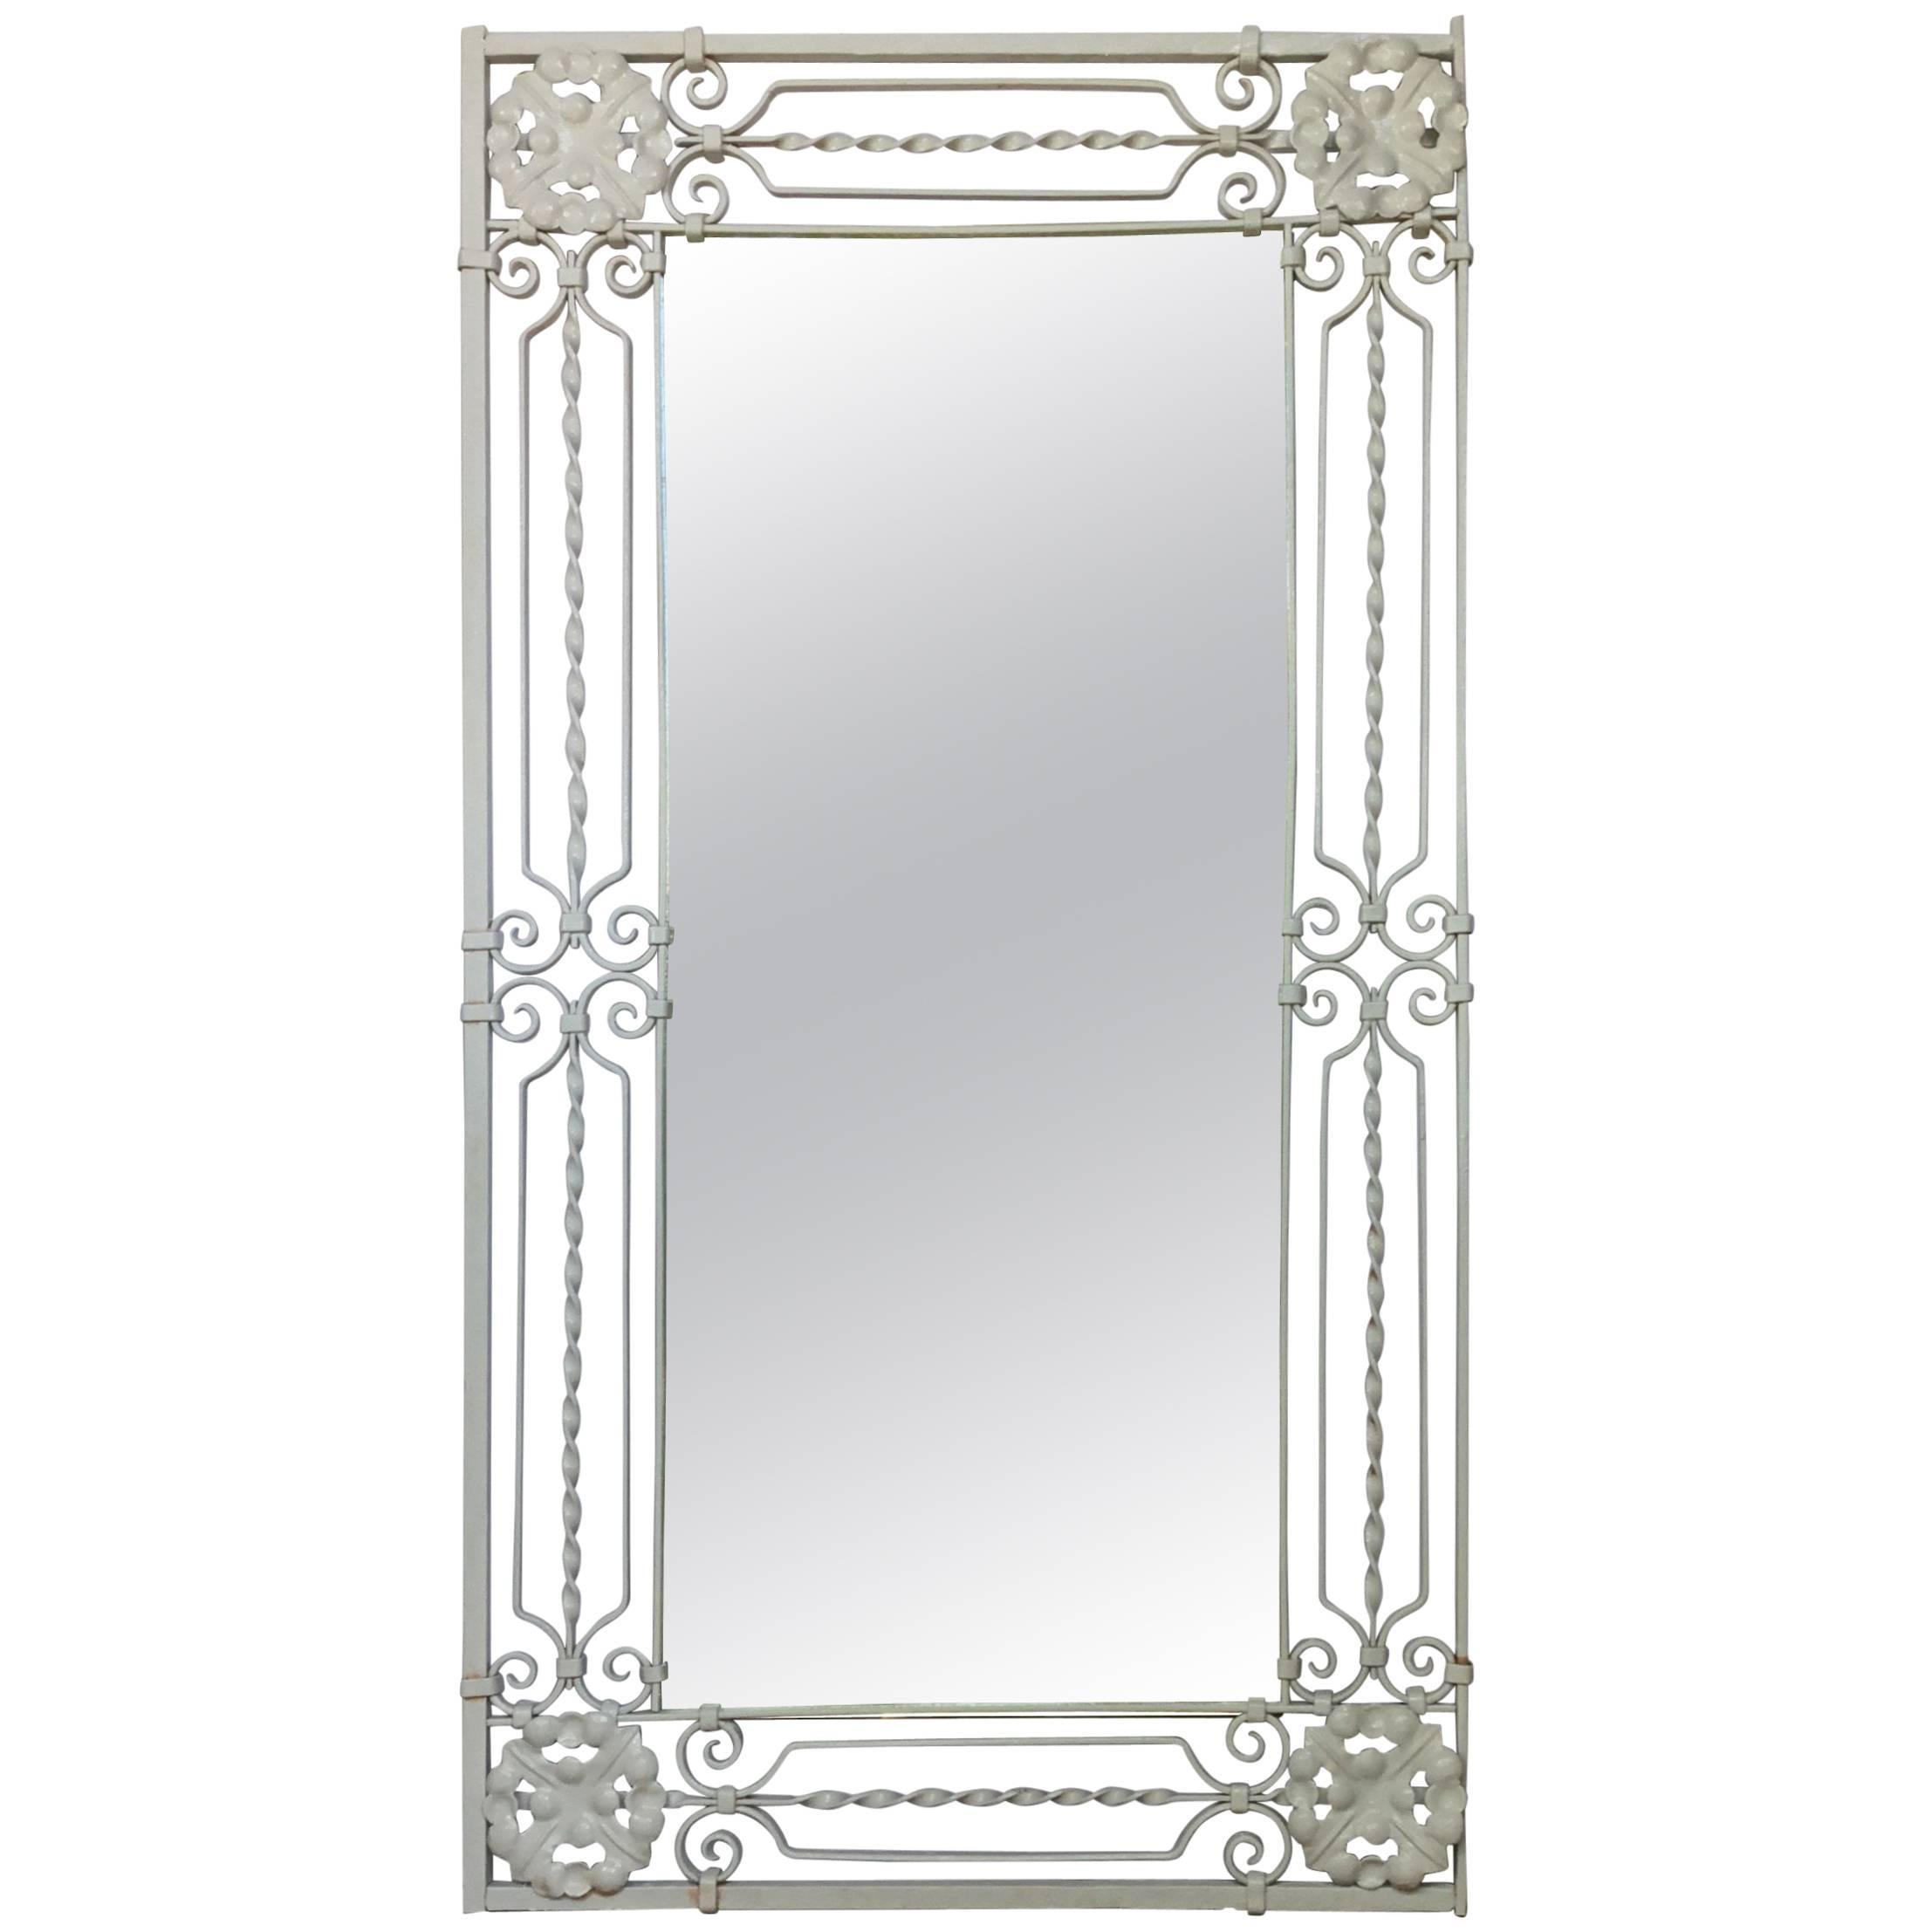 Elegant Hand Twisted Wrought Iron Mirror For Sale